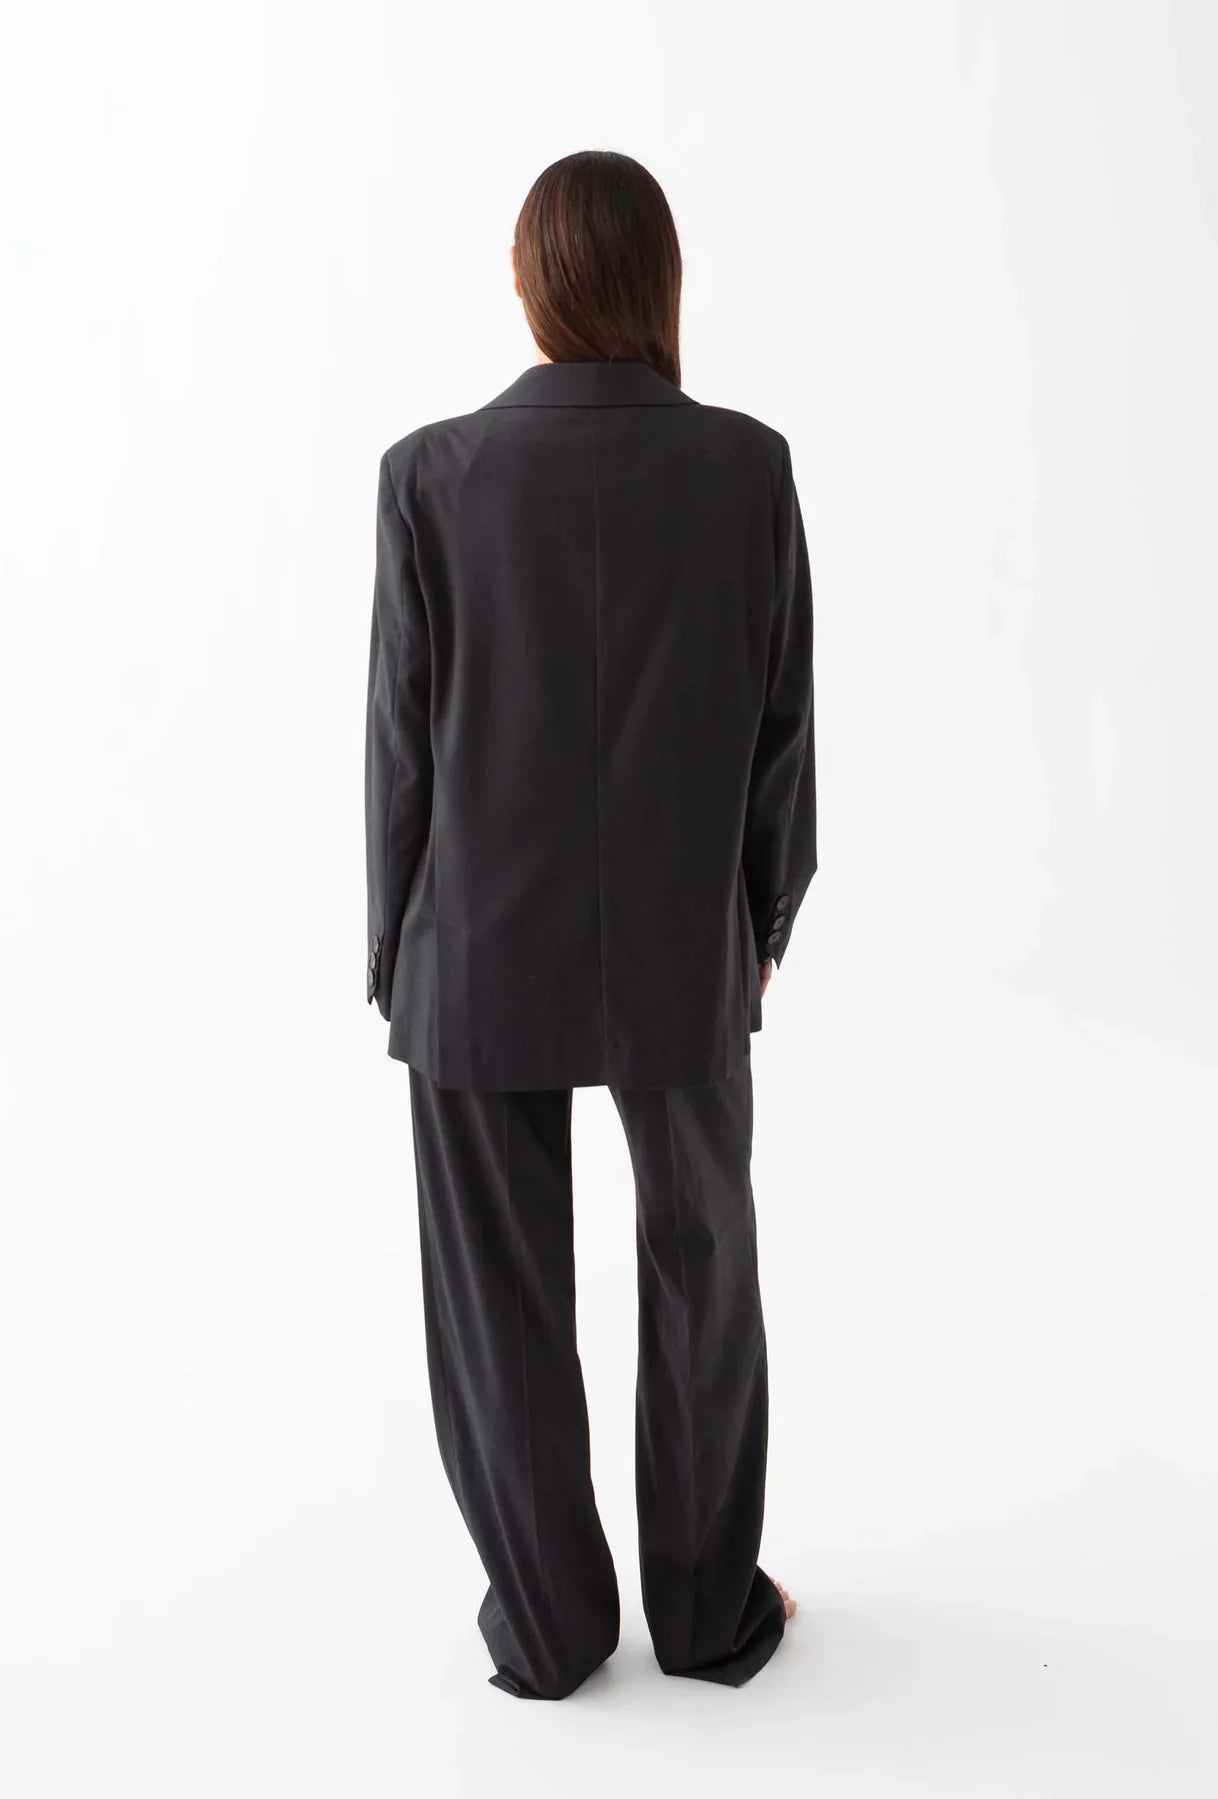 The Tailor Suits: Charcoal - Pants